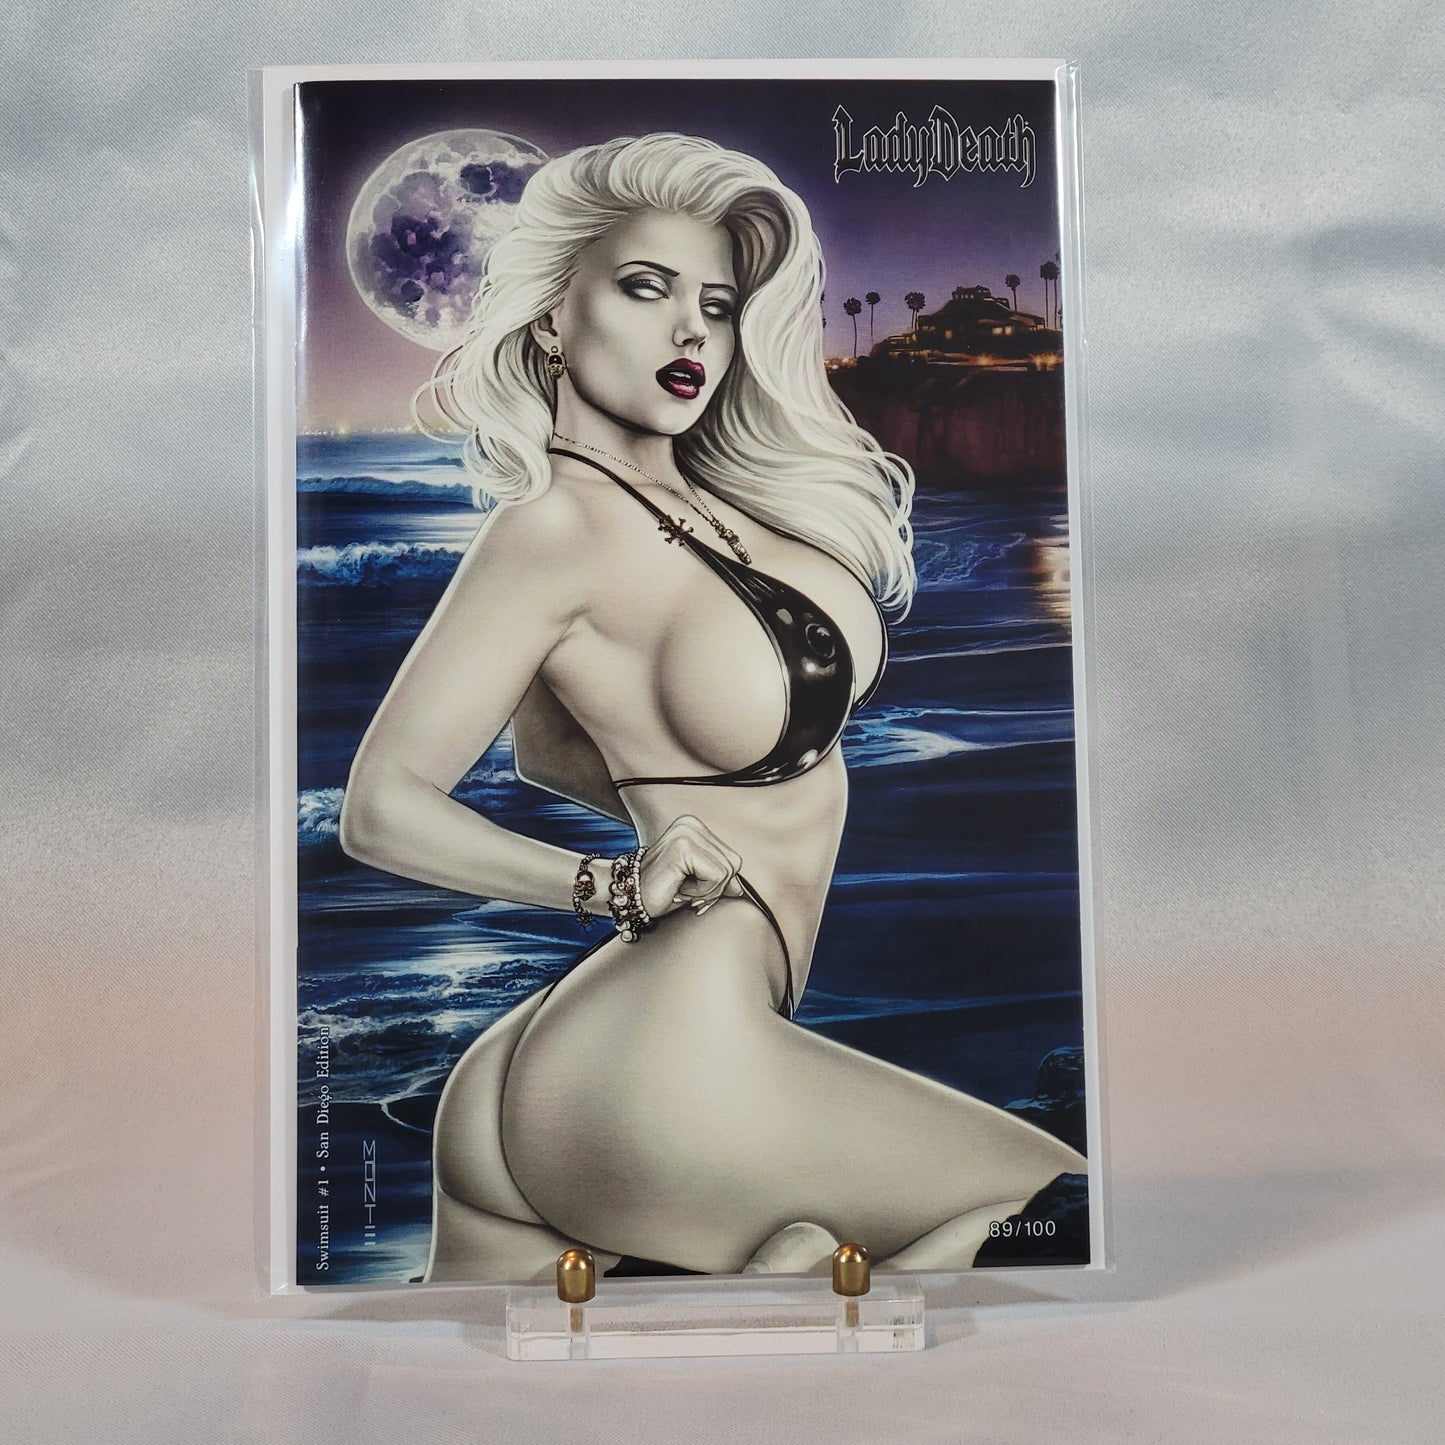 Lady Death: Swimsuit #1 NAUGHTY San Diego Edition